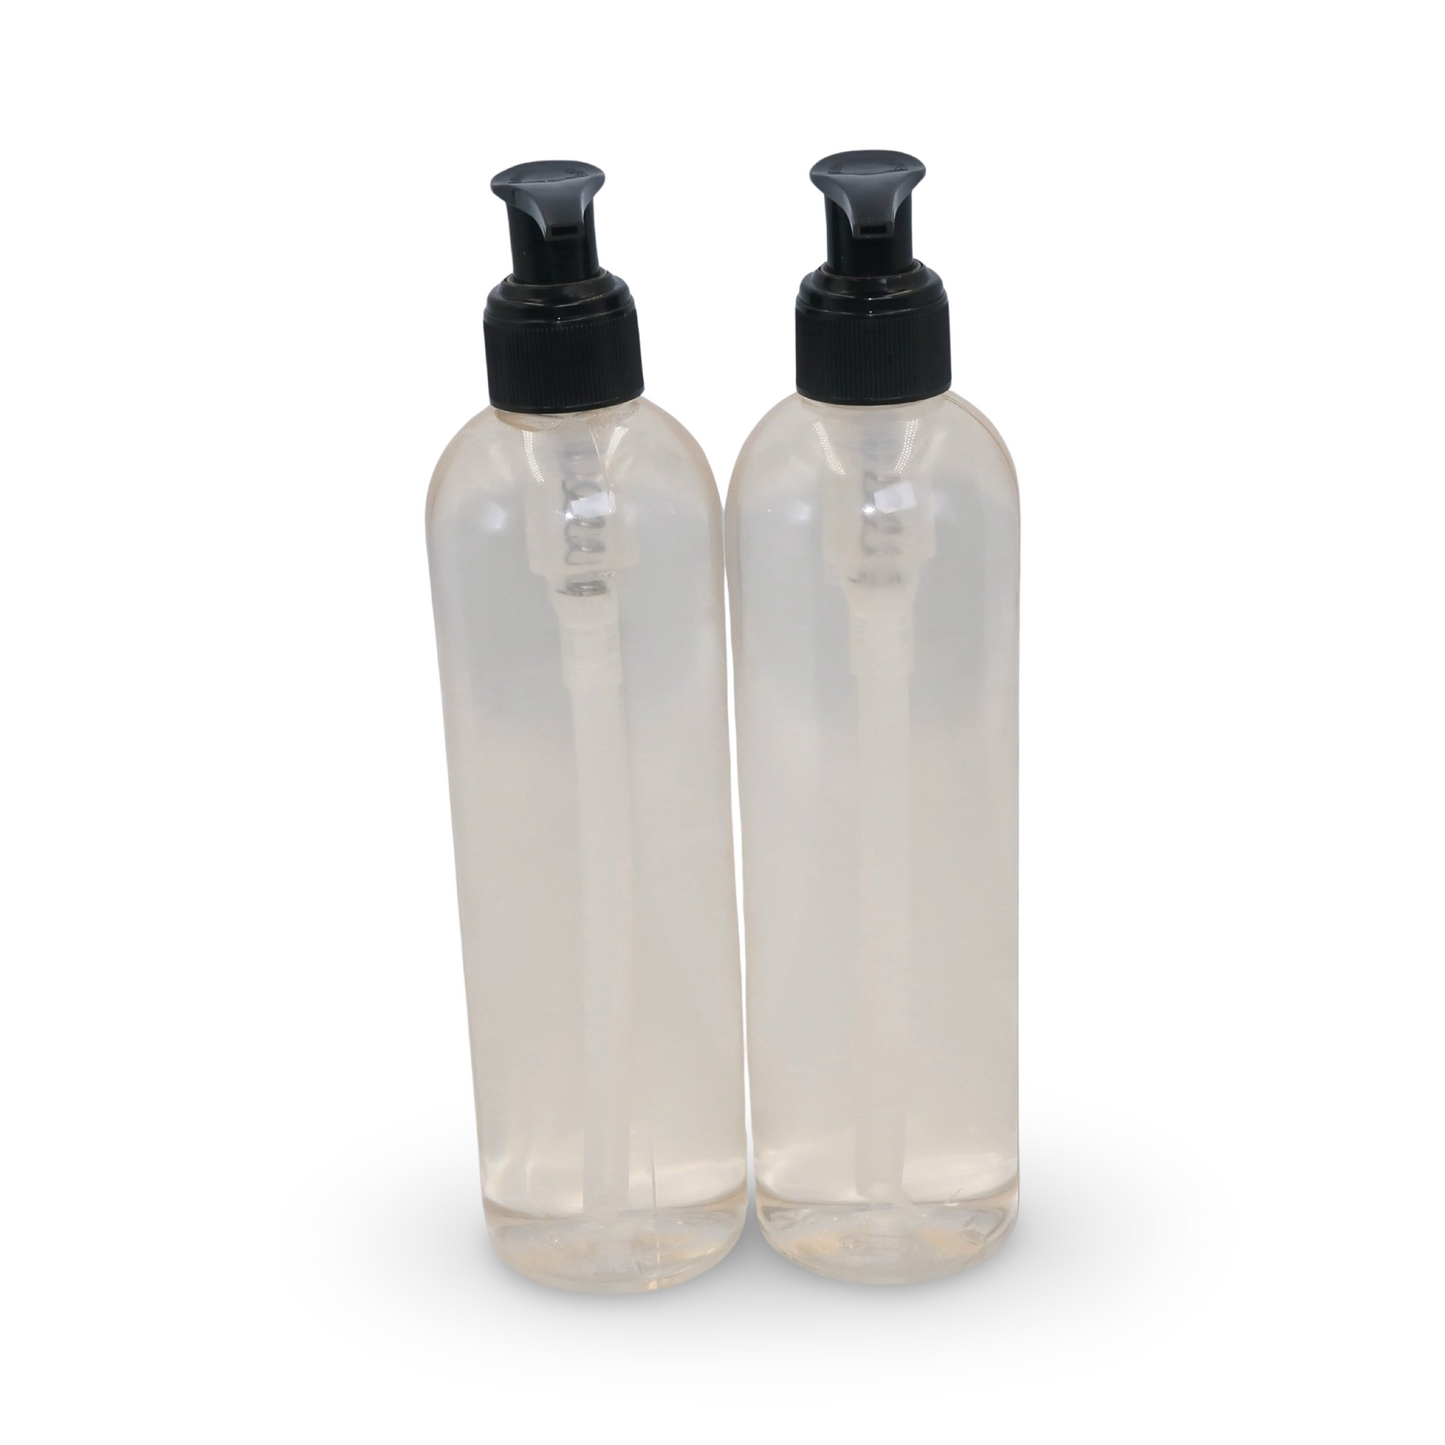 Shower gel for clear and glowing skin enriched with licorice root and niacinamide